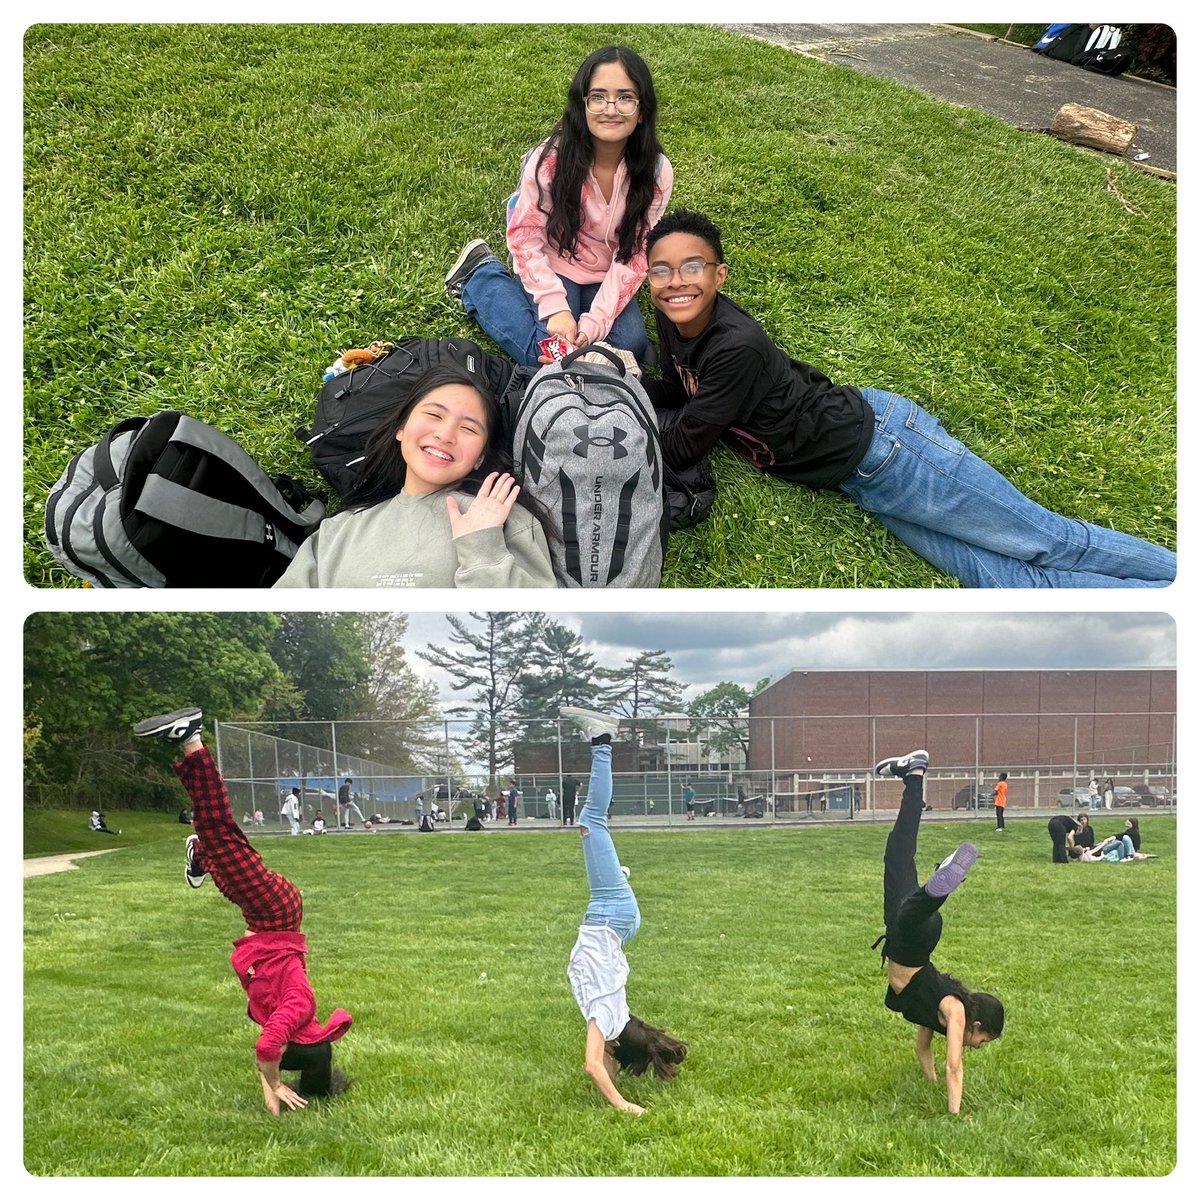 What a beautiful day to “Chat and Chill” @fms_bcps. Ss used ten Dragon Dollars to chat and chill with friends this afternoon! #PBIS @SchifferB @Fschrader1